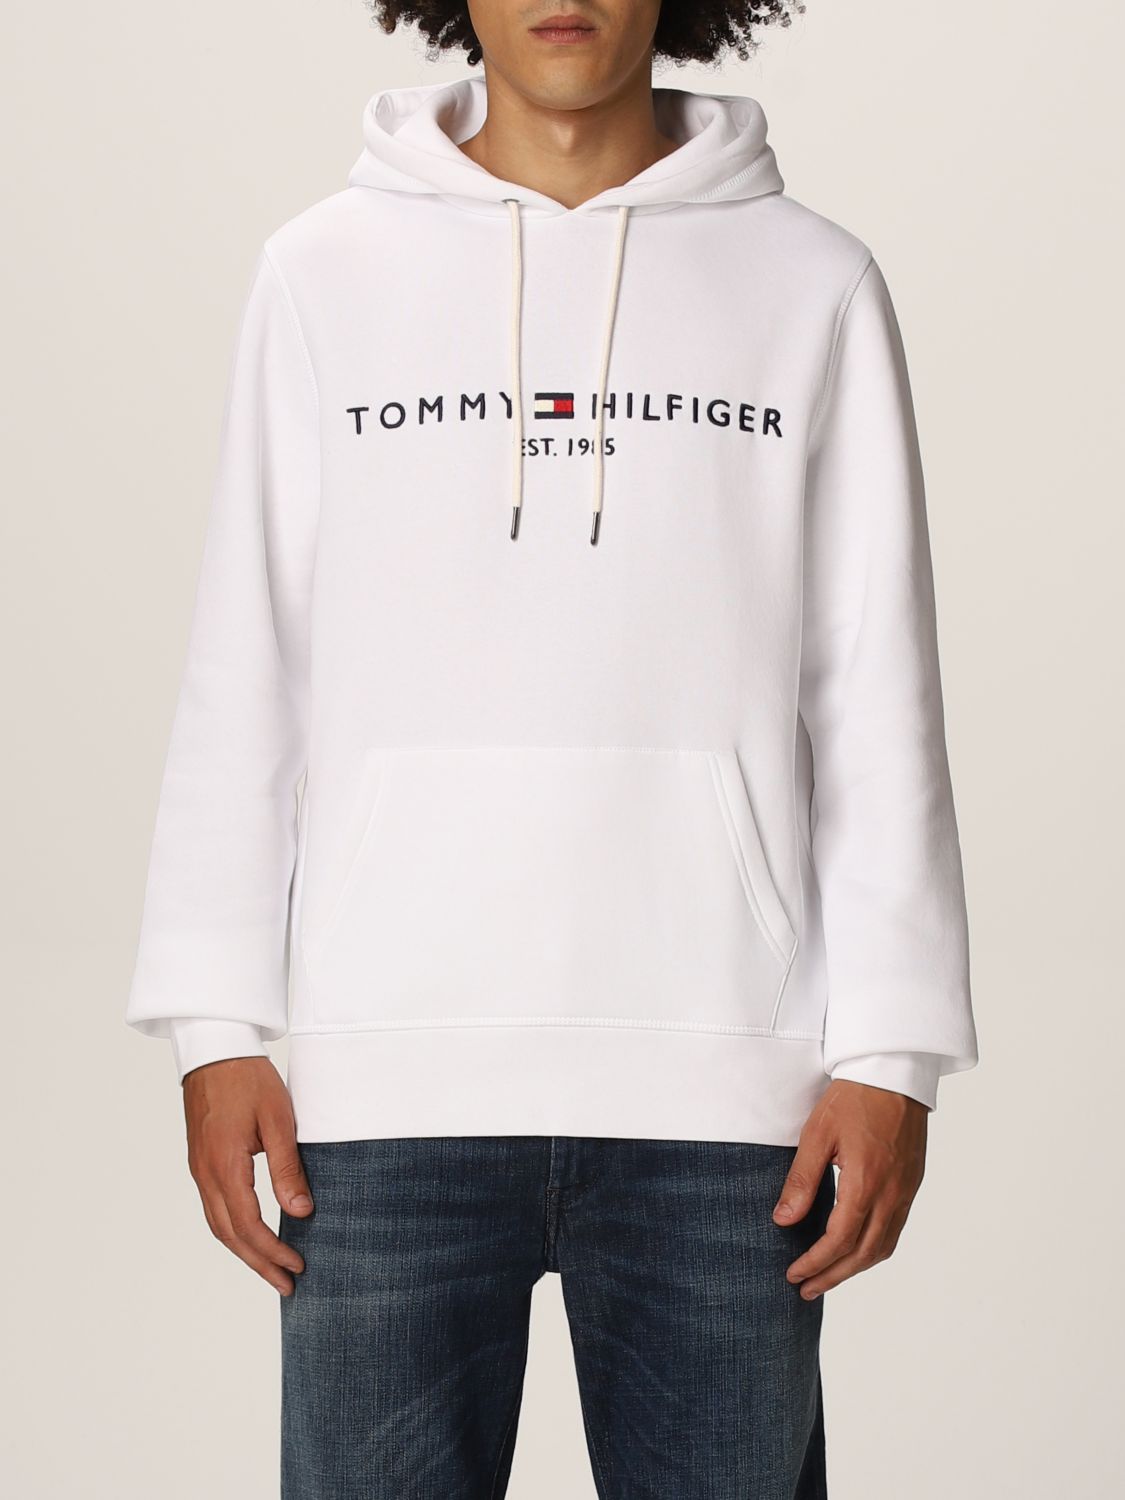 TOMMY HILFIGER: sweatshirt for man - White | Tommy Hilfiger sweatshirt ...